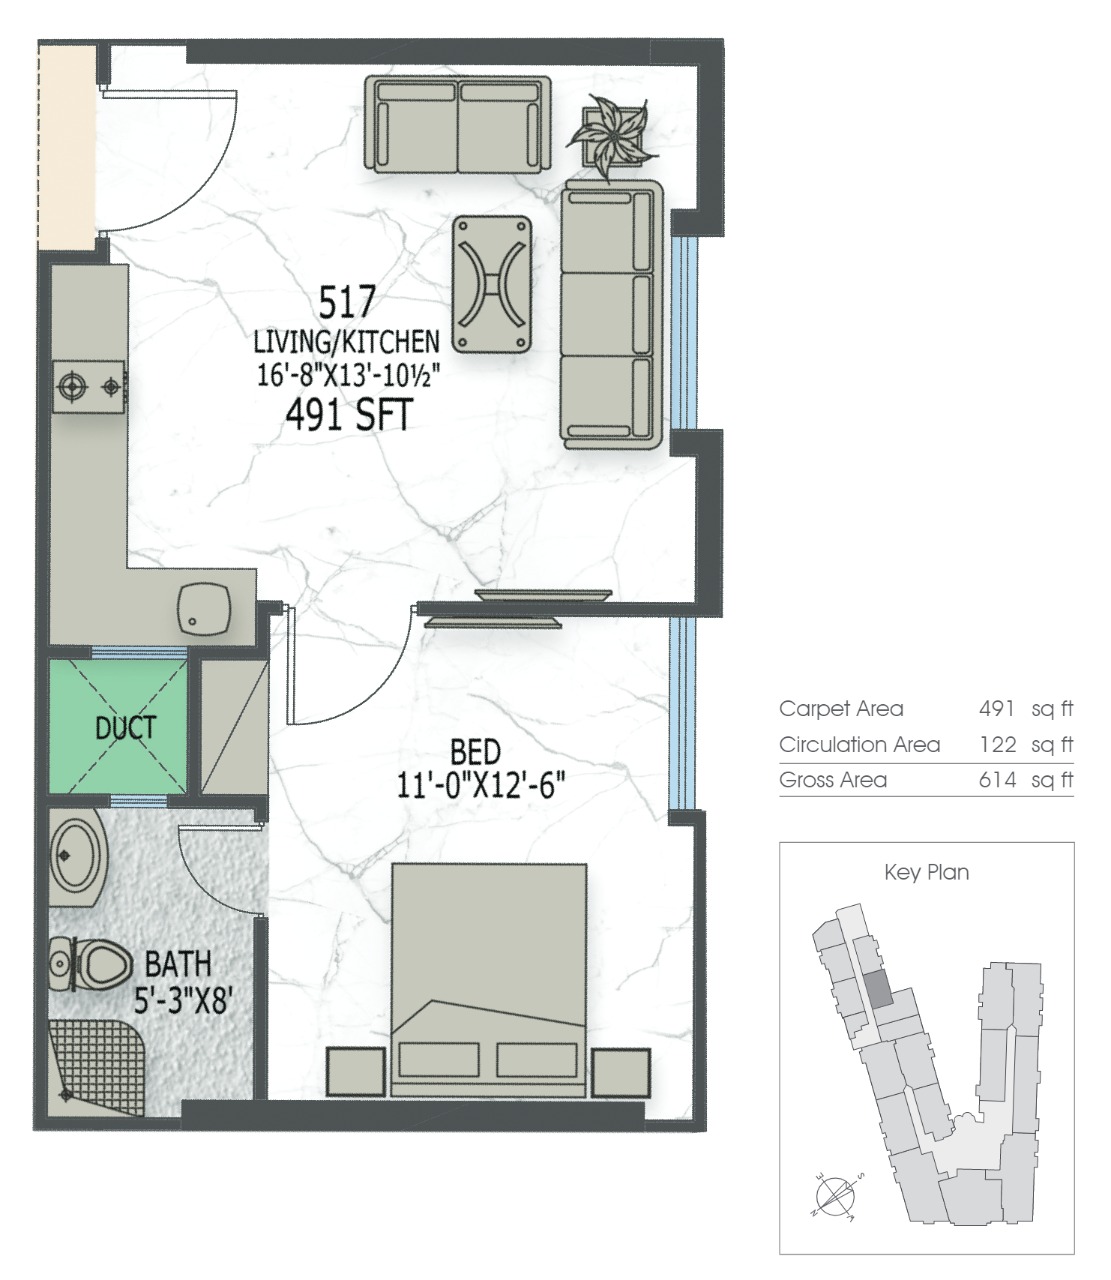 1 Bed Apartment Layout 7 Canal Residence